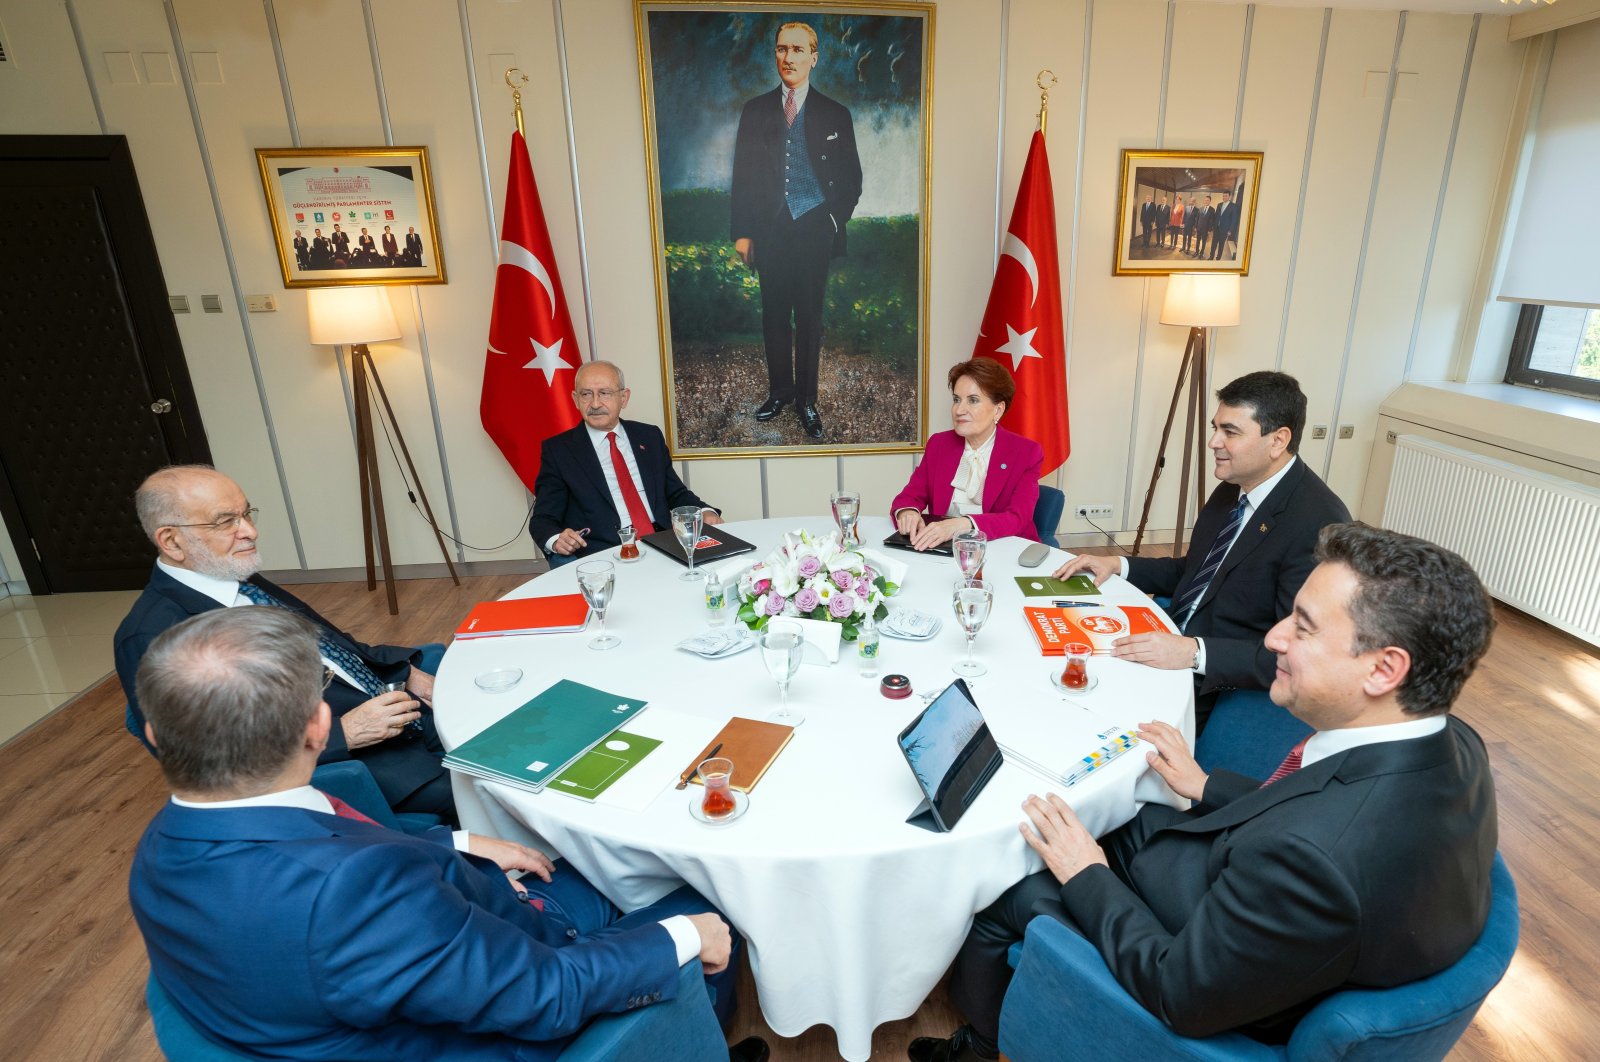 The chairpersons of the political parties in the opposition bloc – known as the “table for six” – attend a meeting at the headquarters of the Democrat Party (DP) in the capital Ankara, Türkiye, Nov. 28, 2022. (IHA Photo)